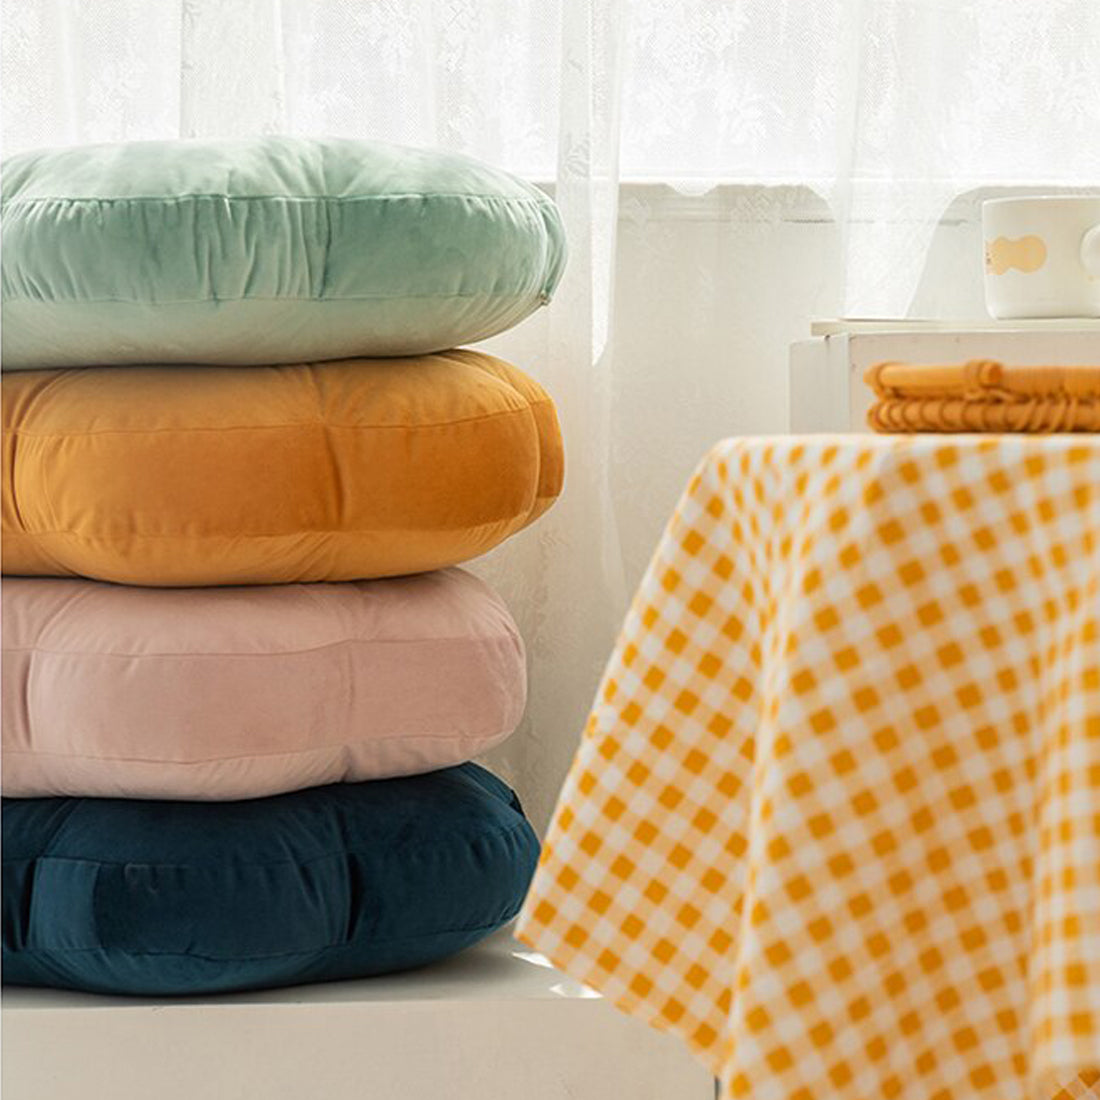  Pillows stacked on table next to yellow and blue checkered tablecloth.